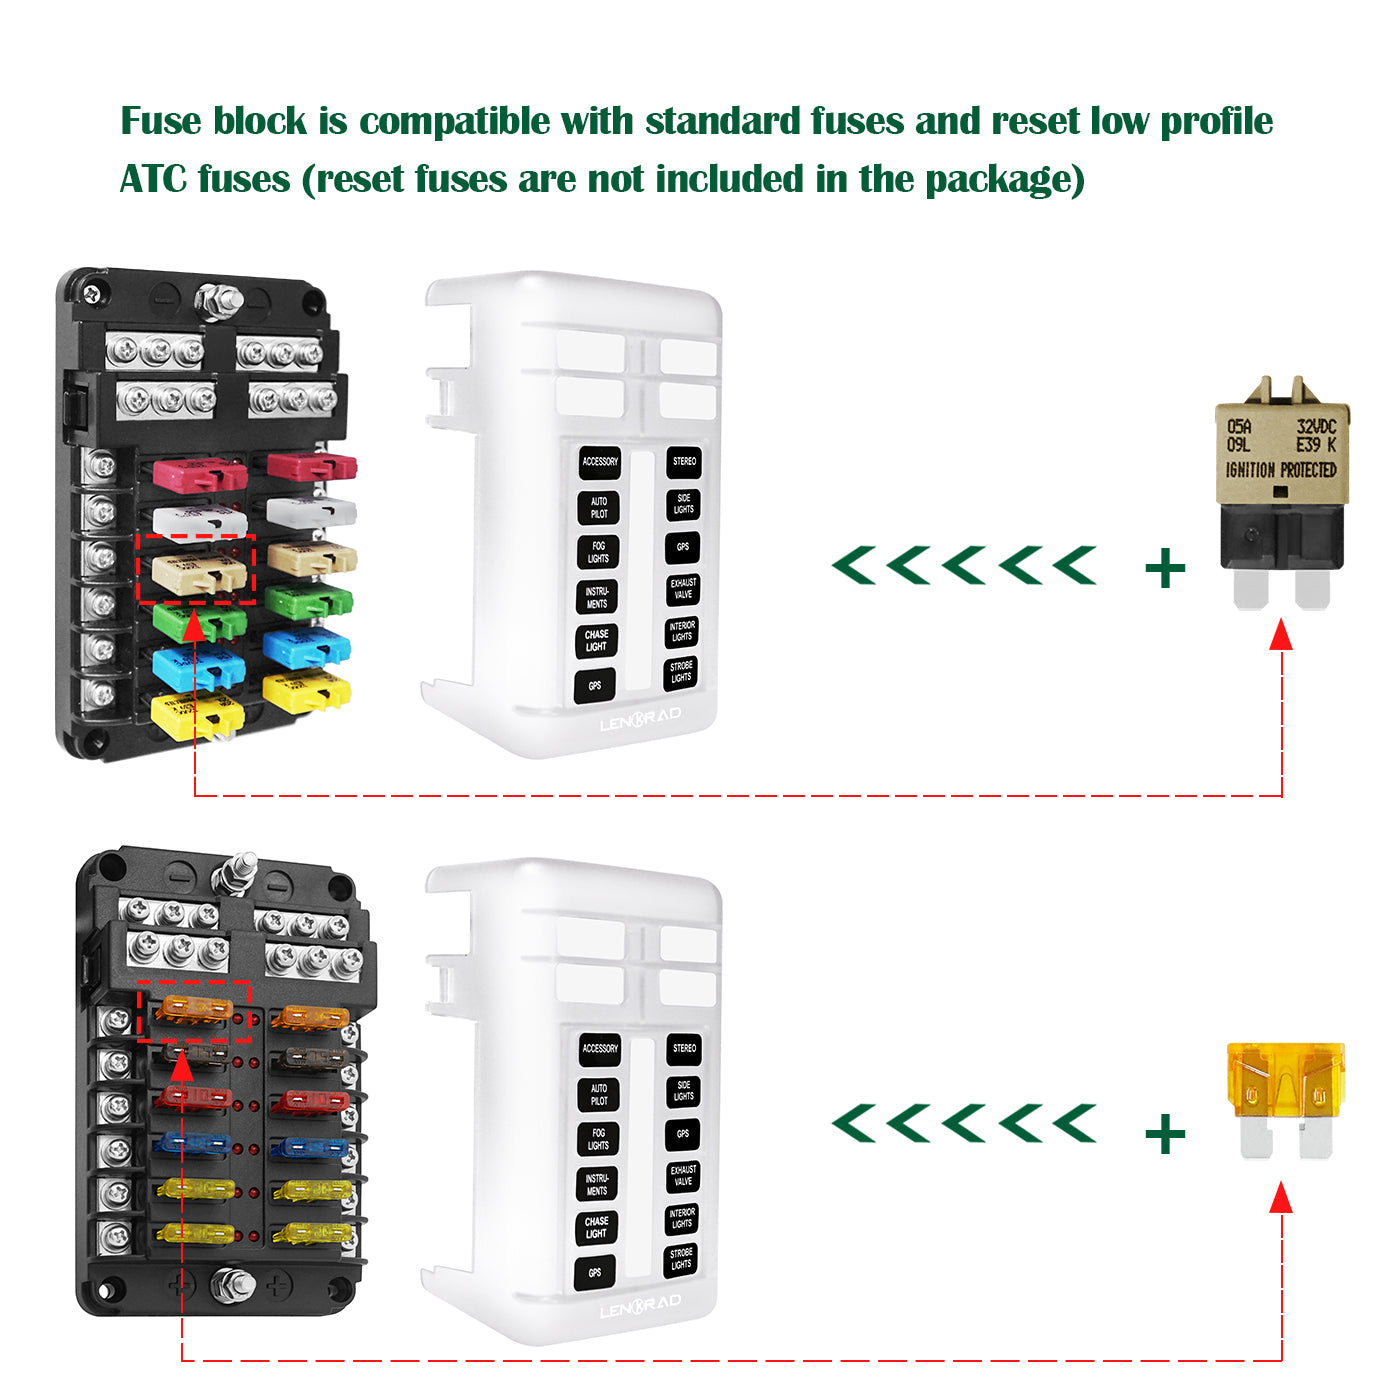 LENKRAD 12 Way Automotive Fuse Block with Negative Bus 12V Blade Fuse Holder ATC/ATO Standard Fuse Box, Waterproof Cover, Bolt Connect Terminals, Label Stickers for Automotive Cars Trucks RV Campers - THALASSA